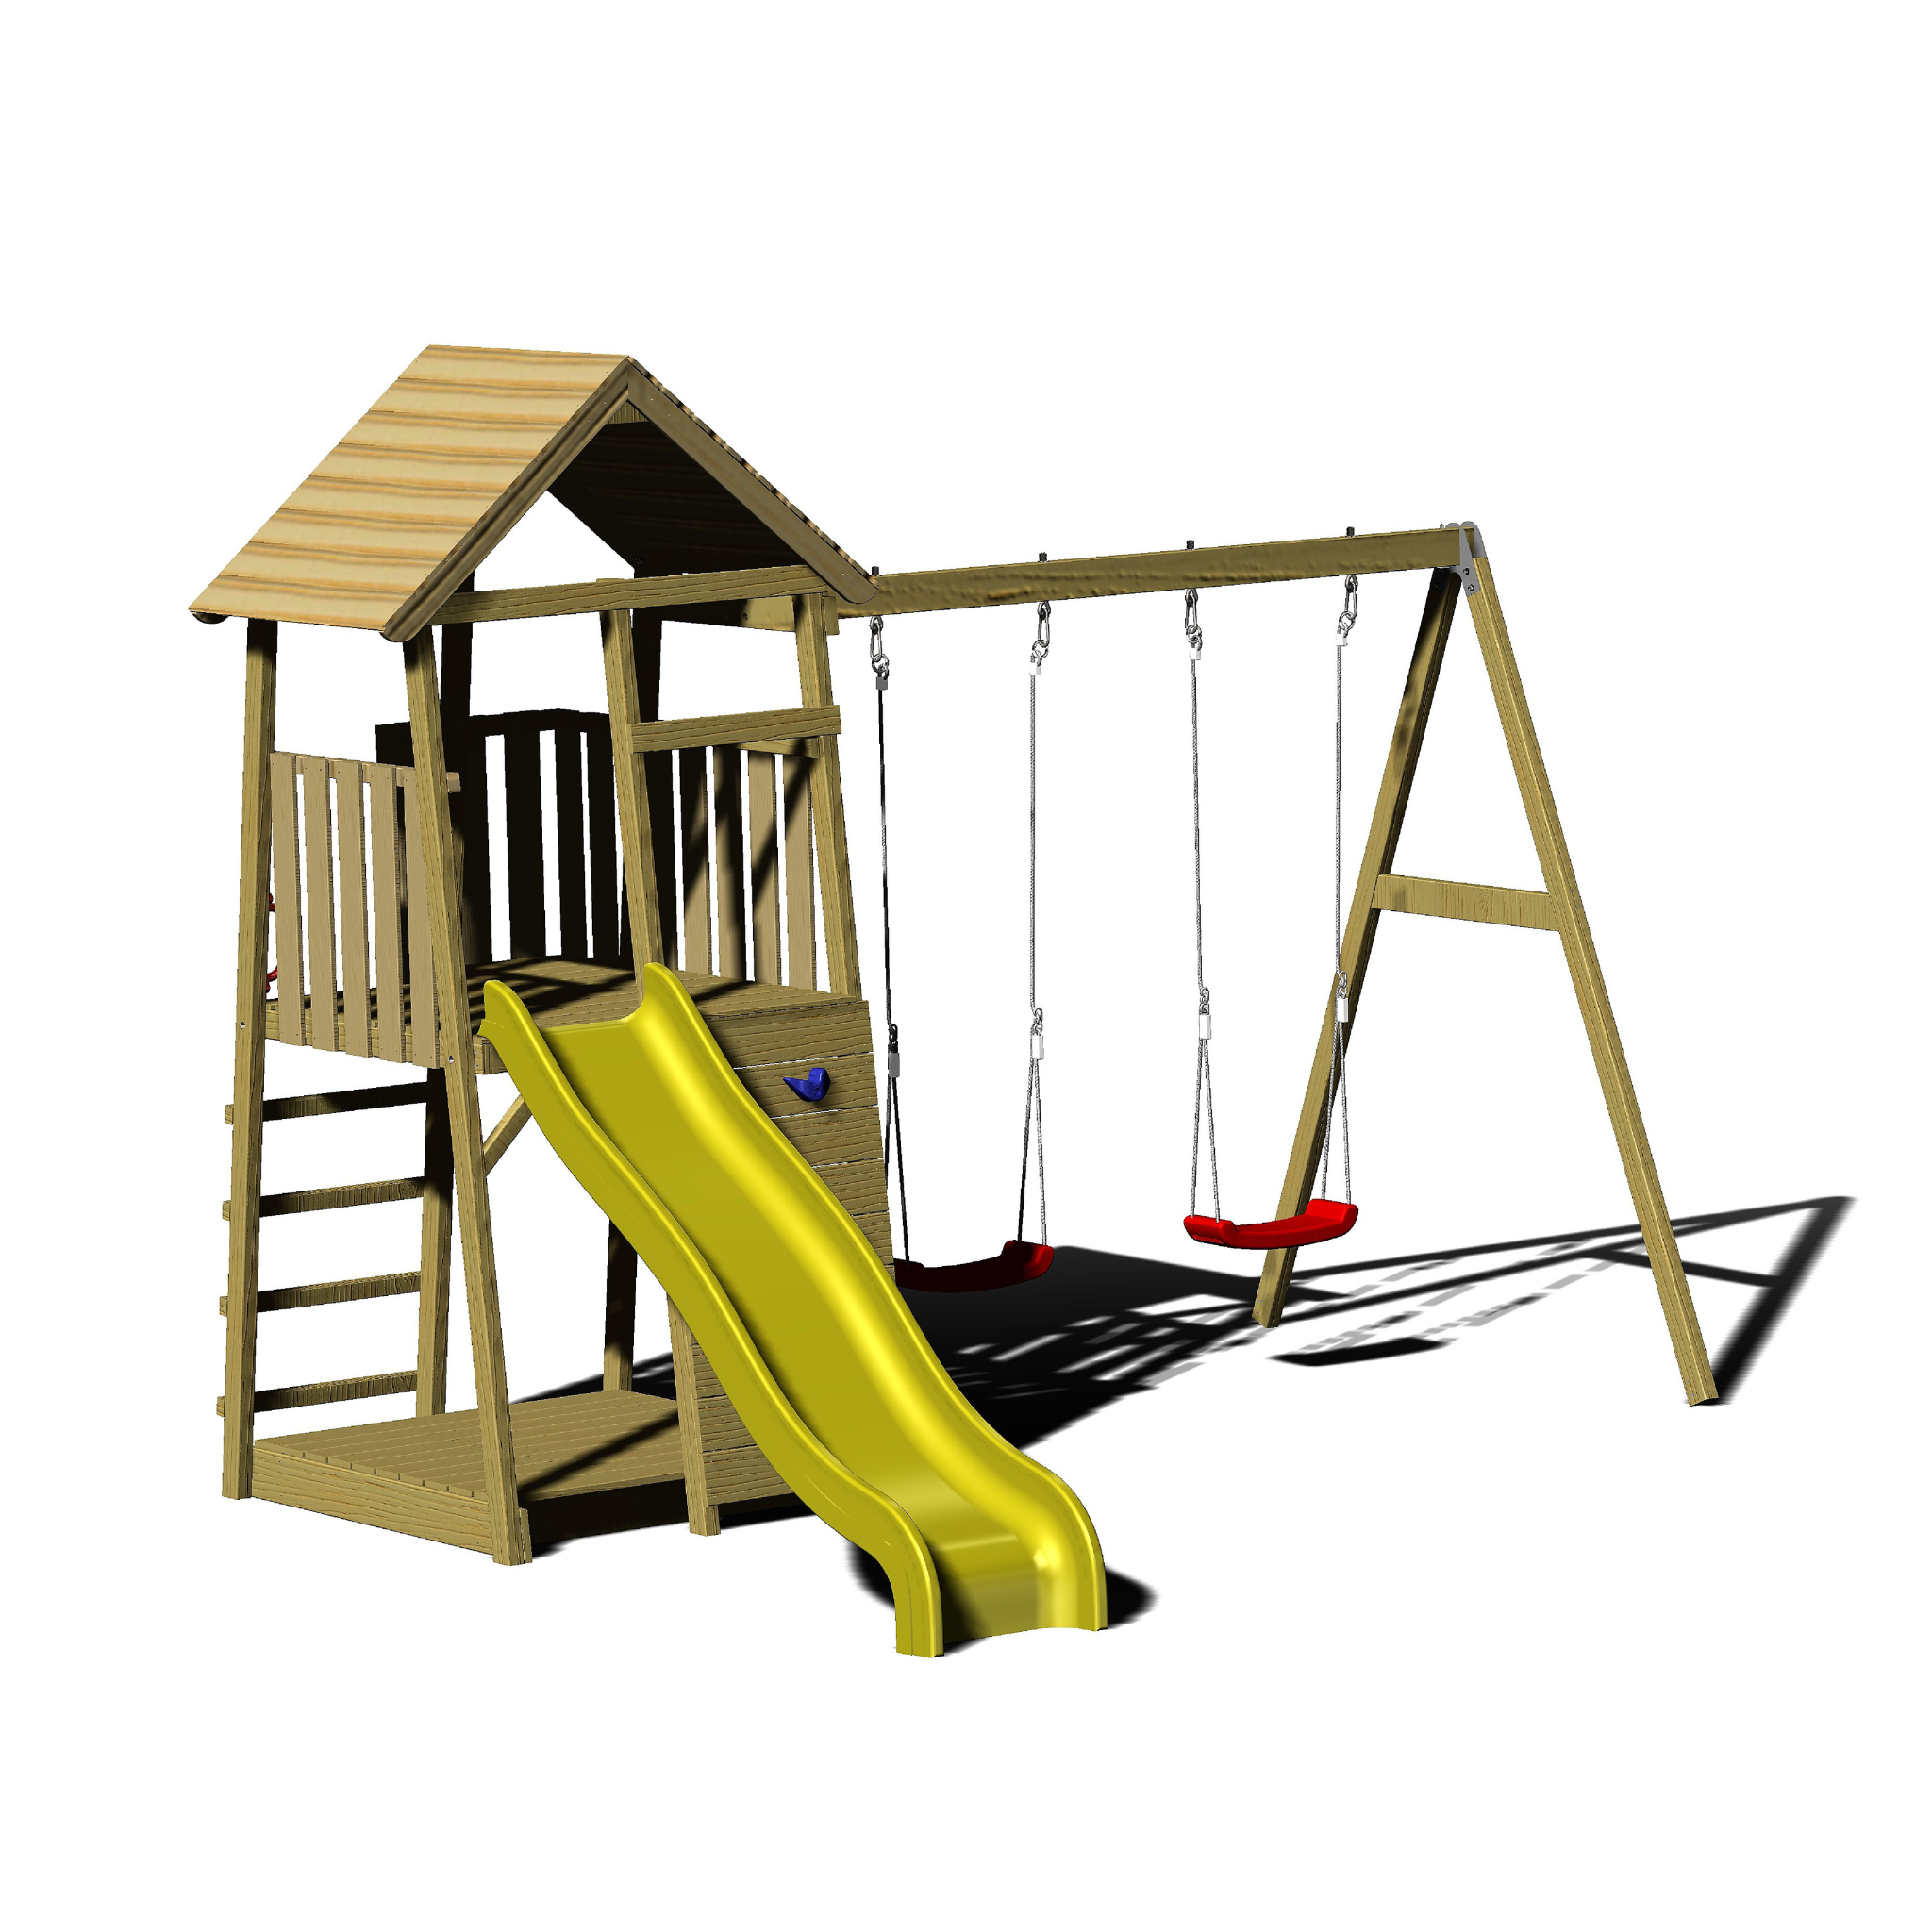 J5 Junior Play Tower with Slide, Sandpit and Double Swing